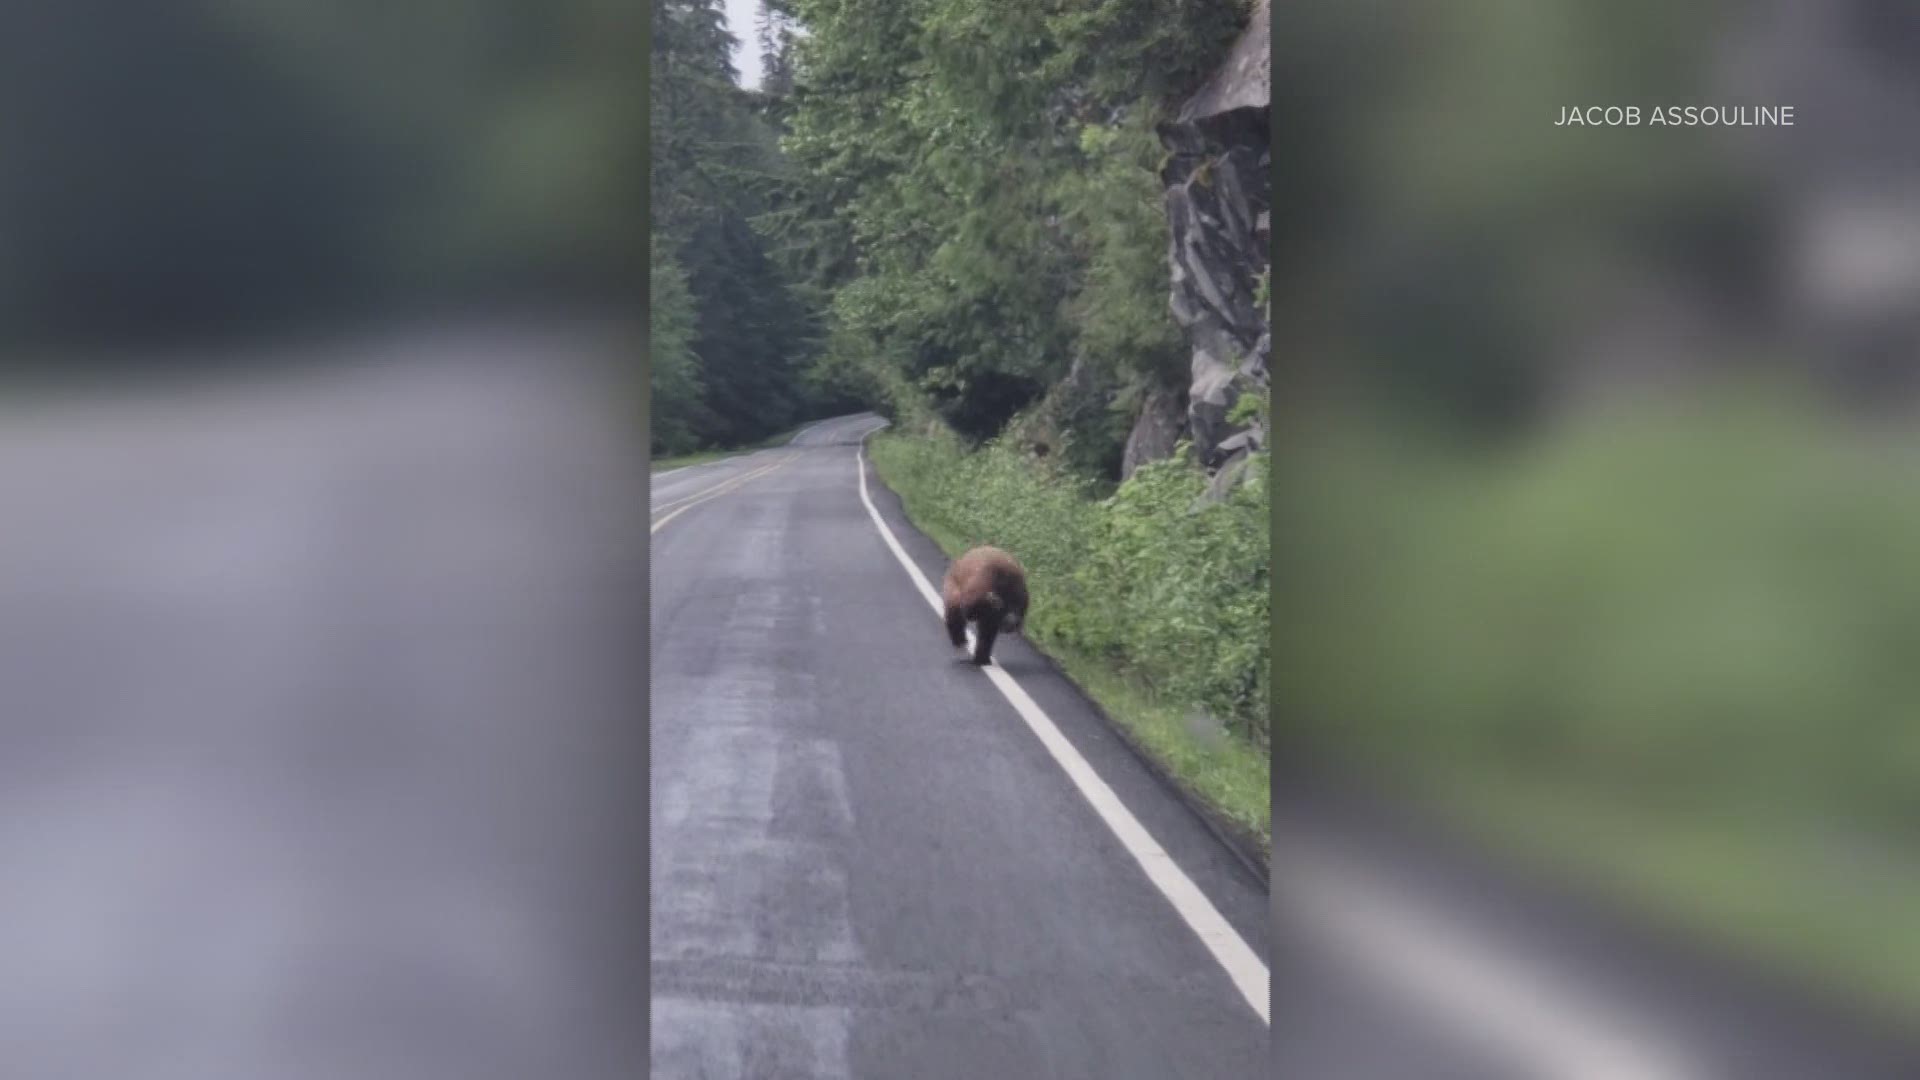 Jacob Assouline and his father captured the video this week while driving along Highway 410 in Mount Rainier National Park.